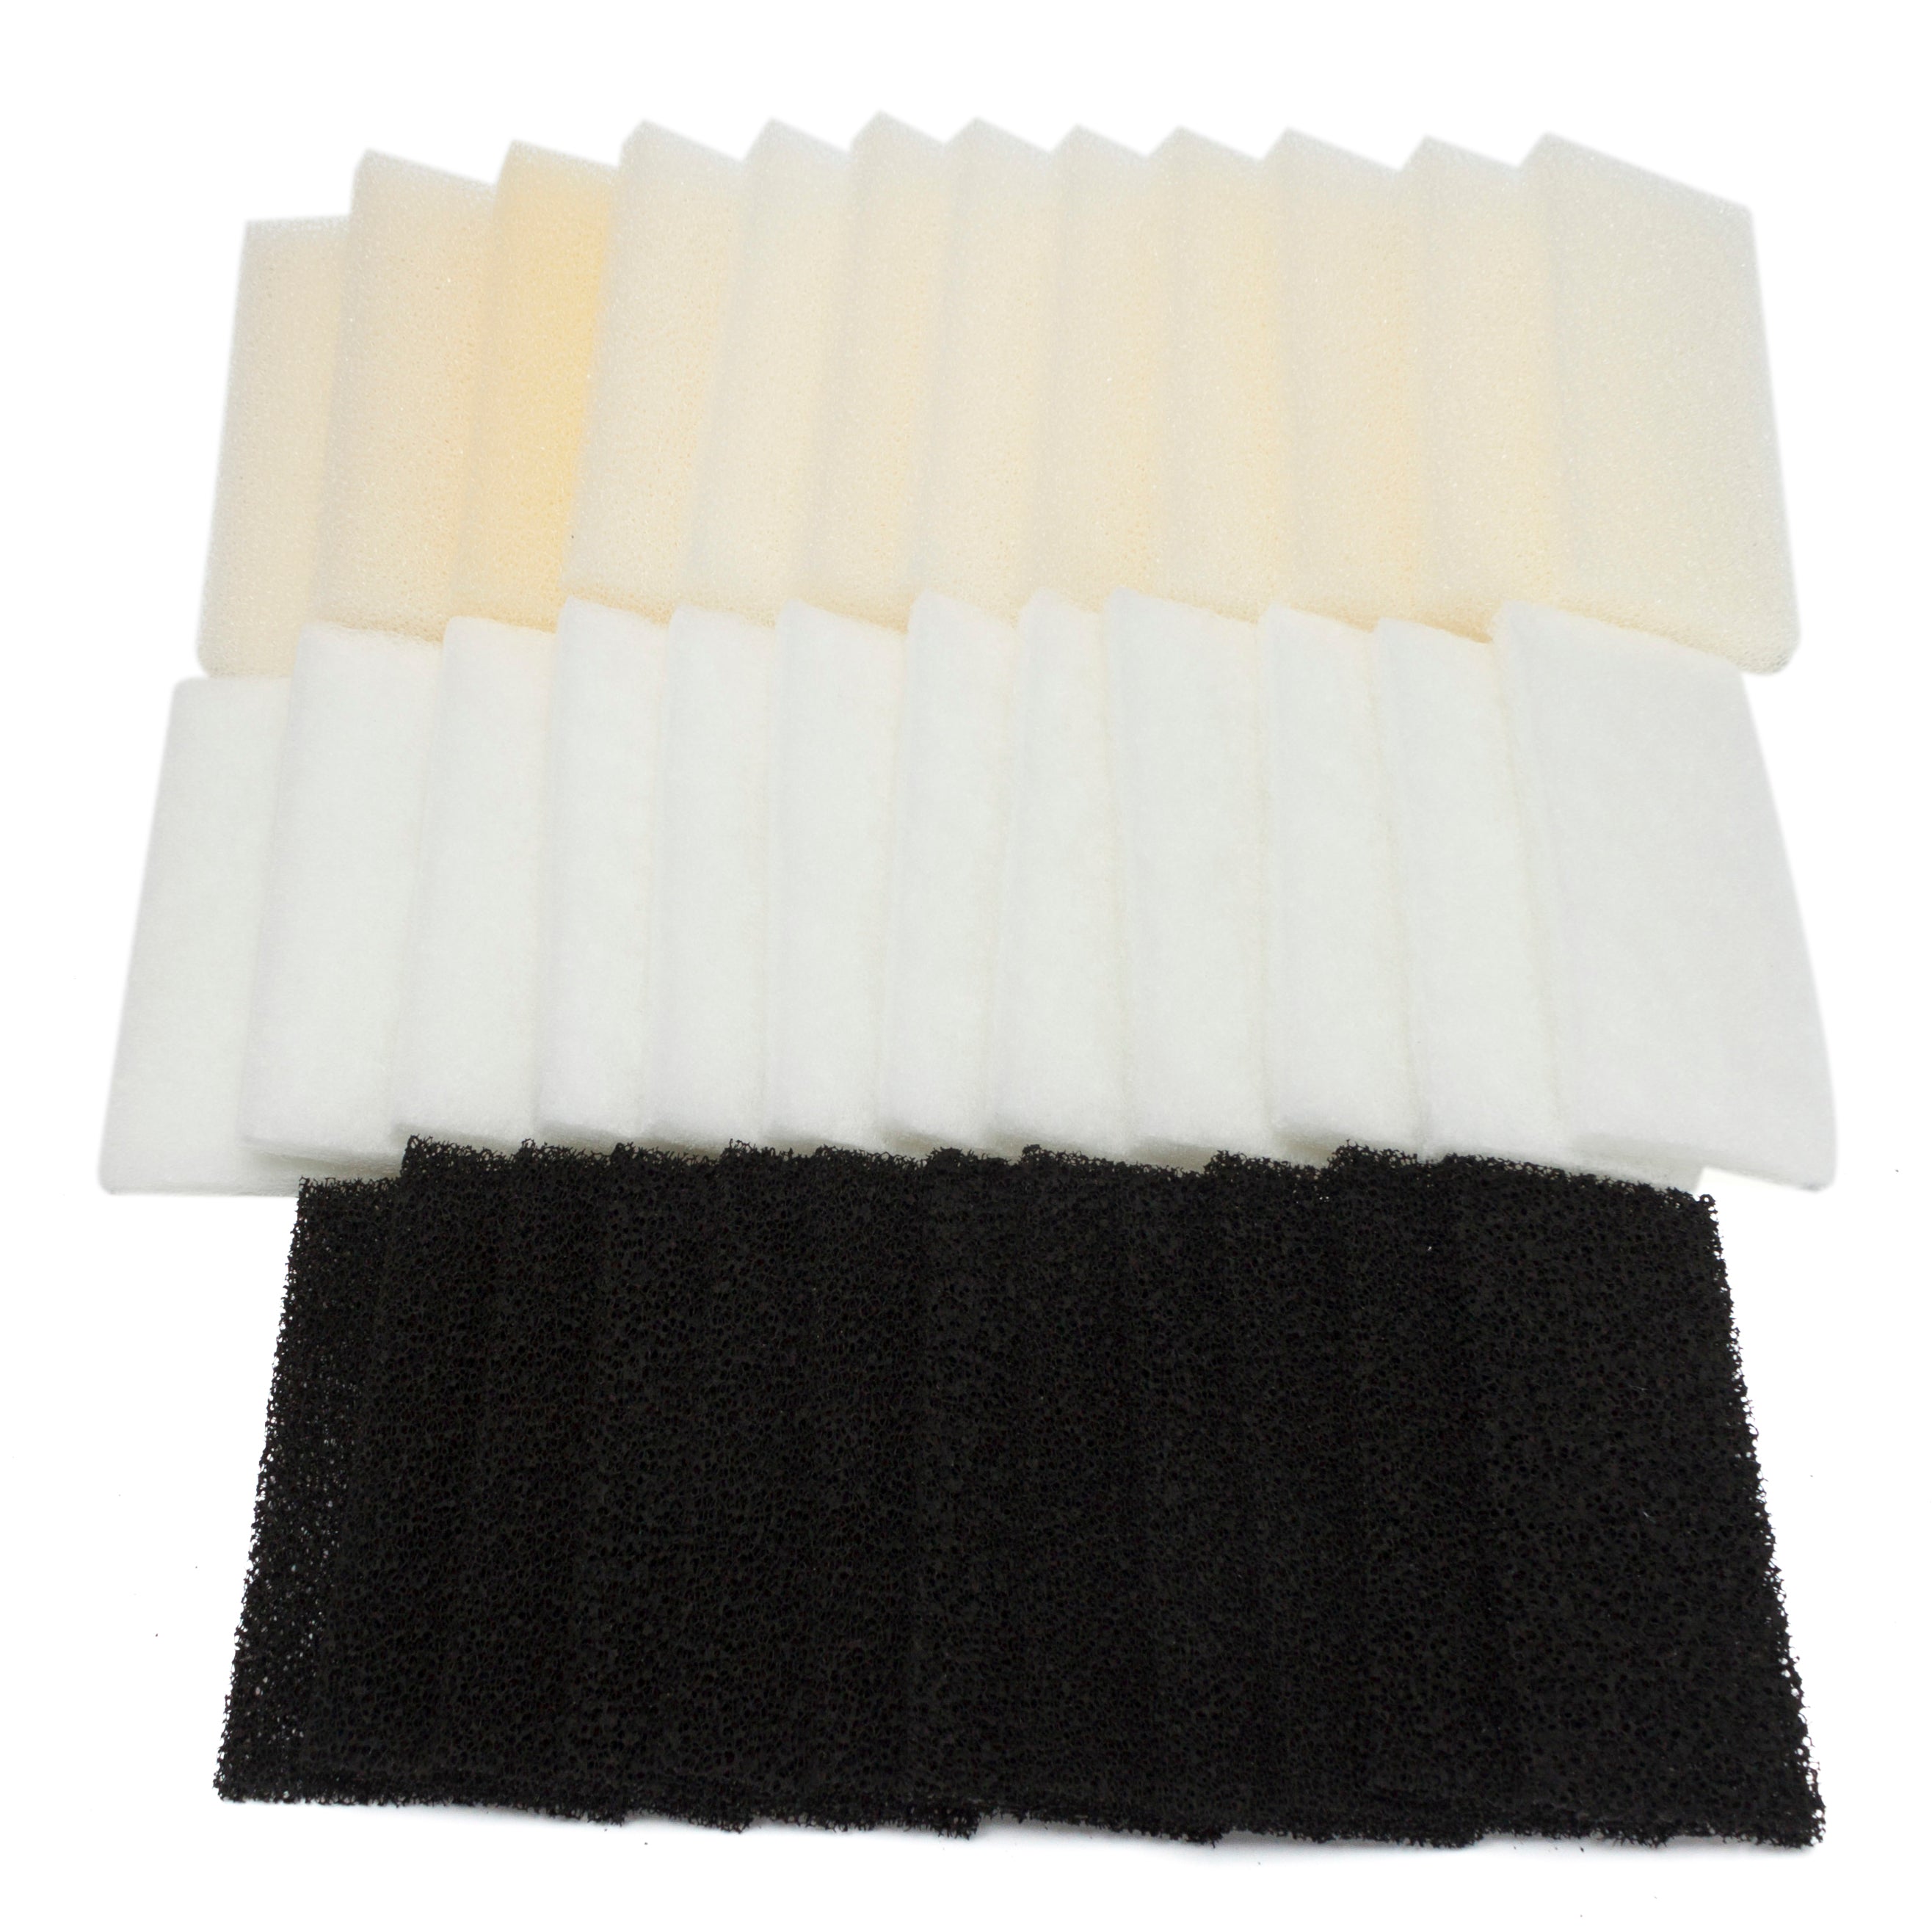 LTWHOME Value Pack of Foam Filters, Carbon Filters and Polyester Filters Set Fit for Fluval U2 Filter(Pack of 36)